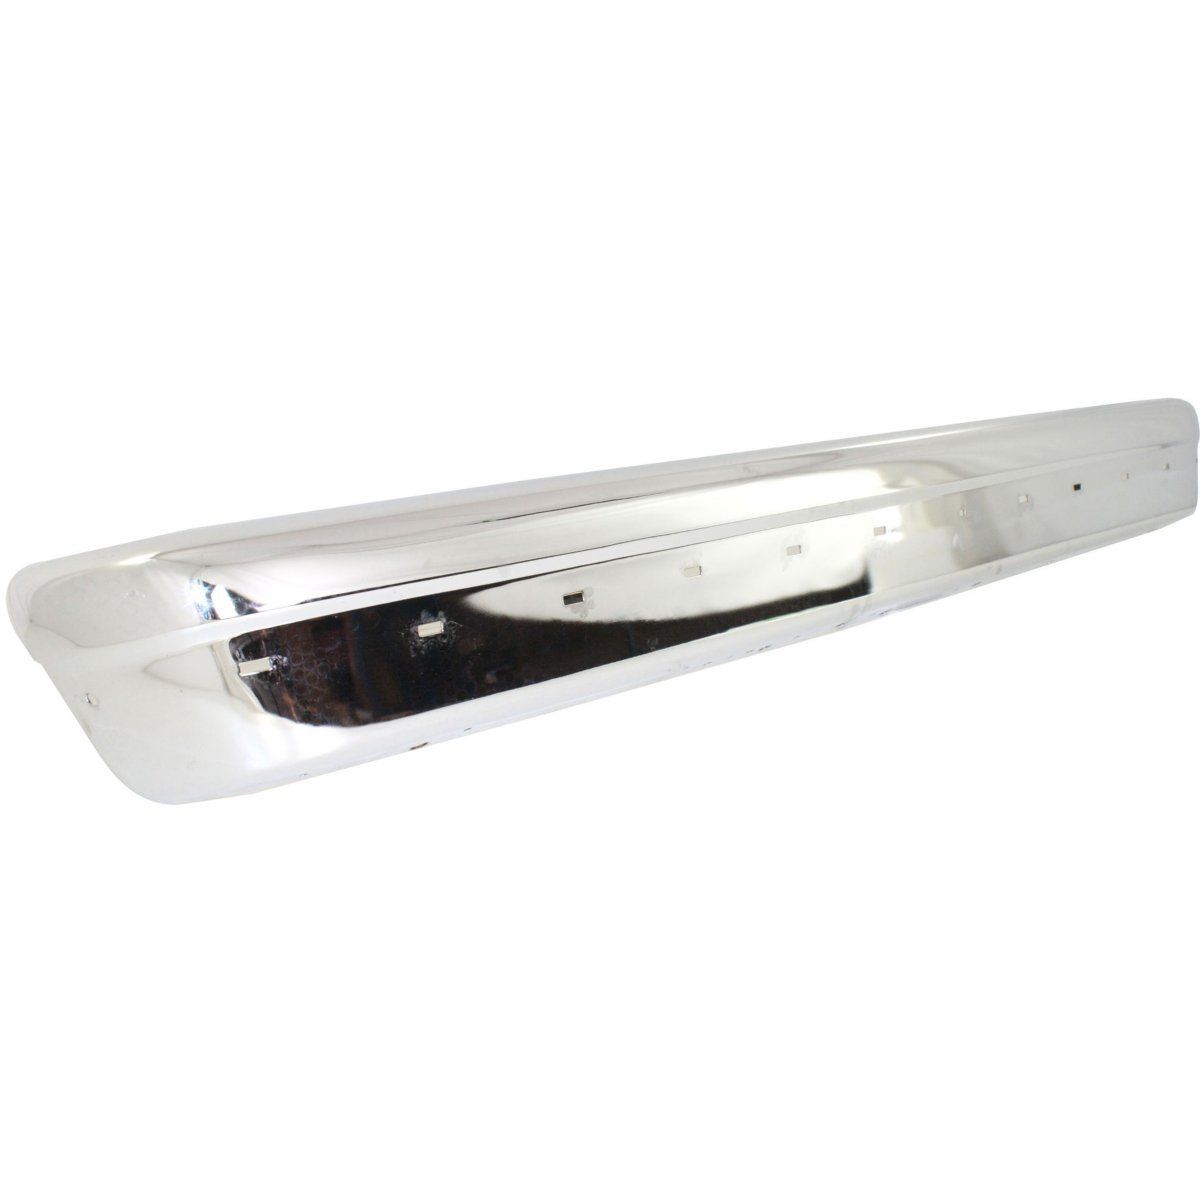 Rear Bumper For 2003-2004 Ford E-250 Chrome Steel w/ pad holes